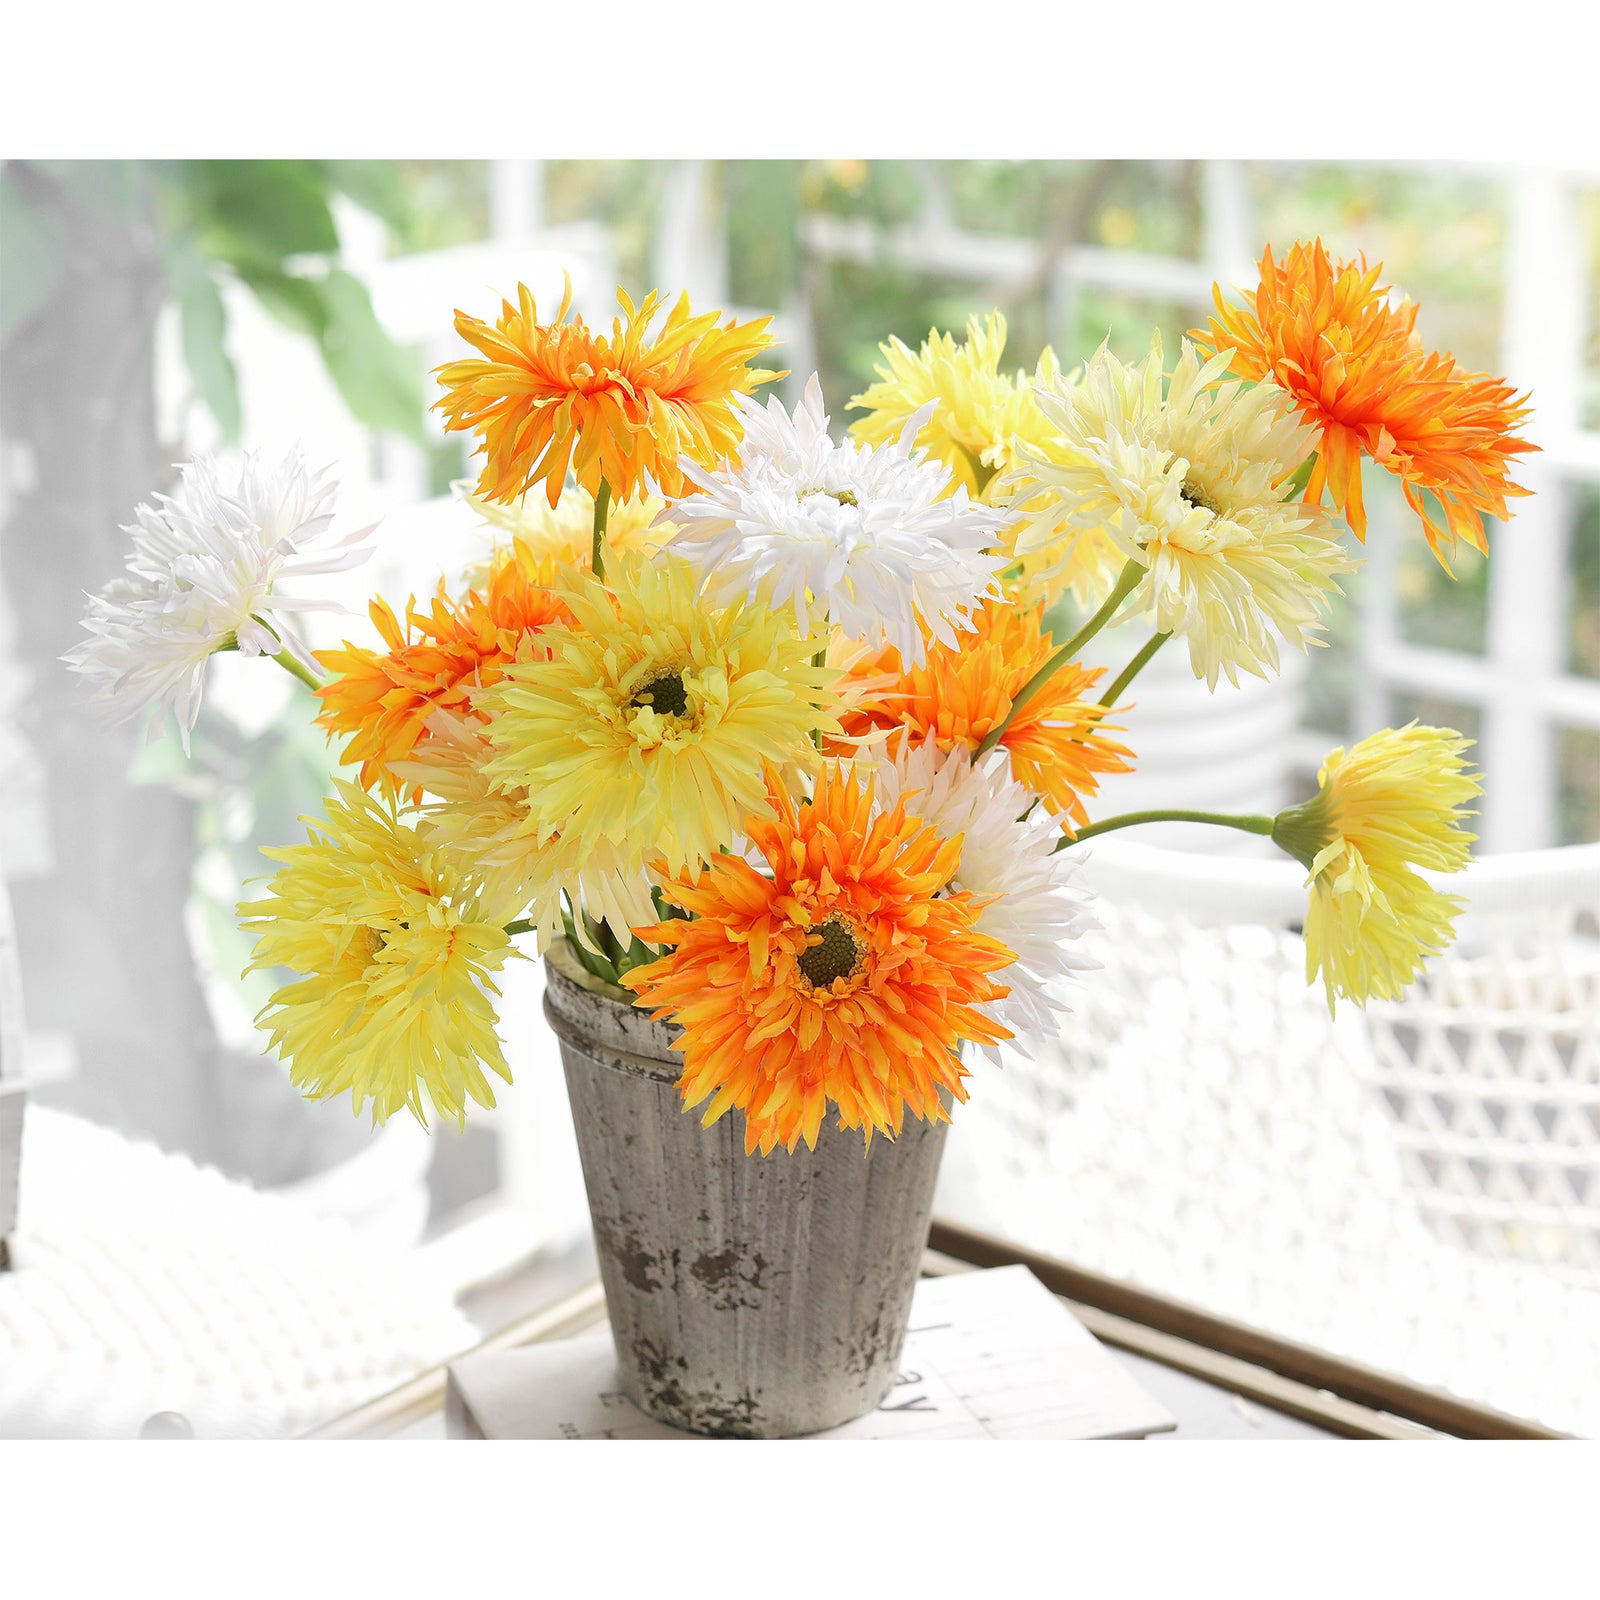 Artificial Daisy Flowers White Daisy Flowers Artificial,21 Head Fake  Daisies,Spring Wild Flower For Party Decor